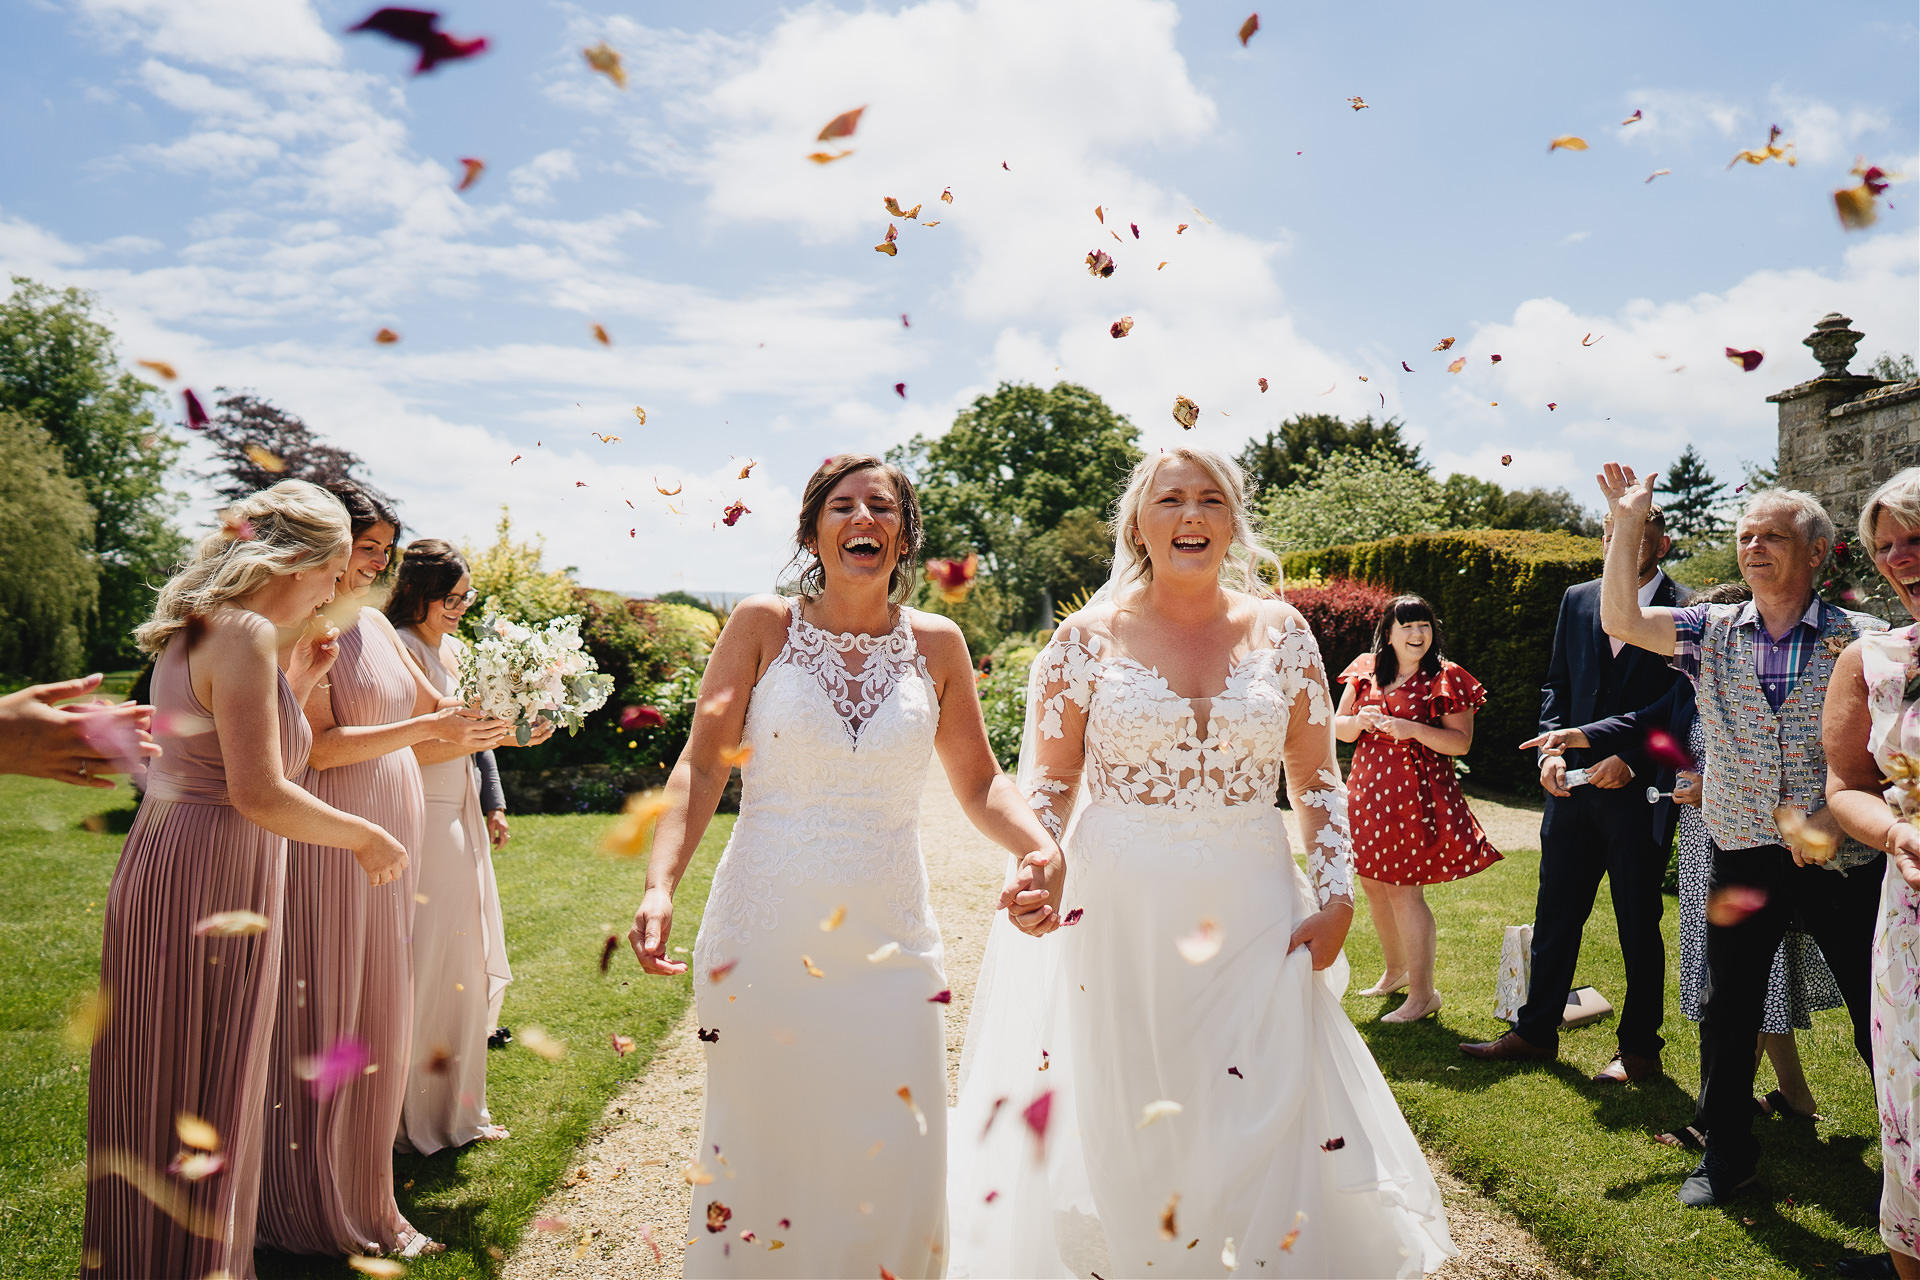 Bride and bride laughing as confetti is thrown over them